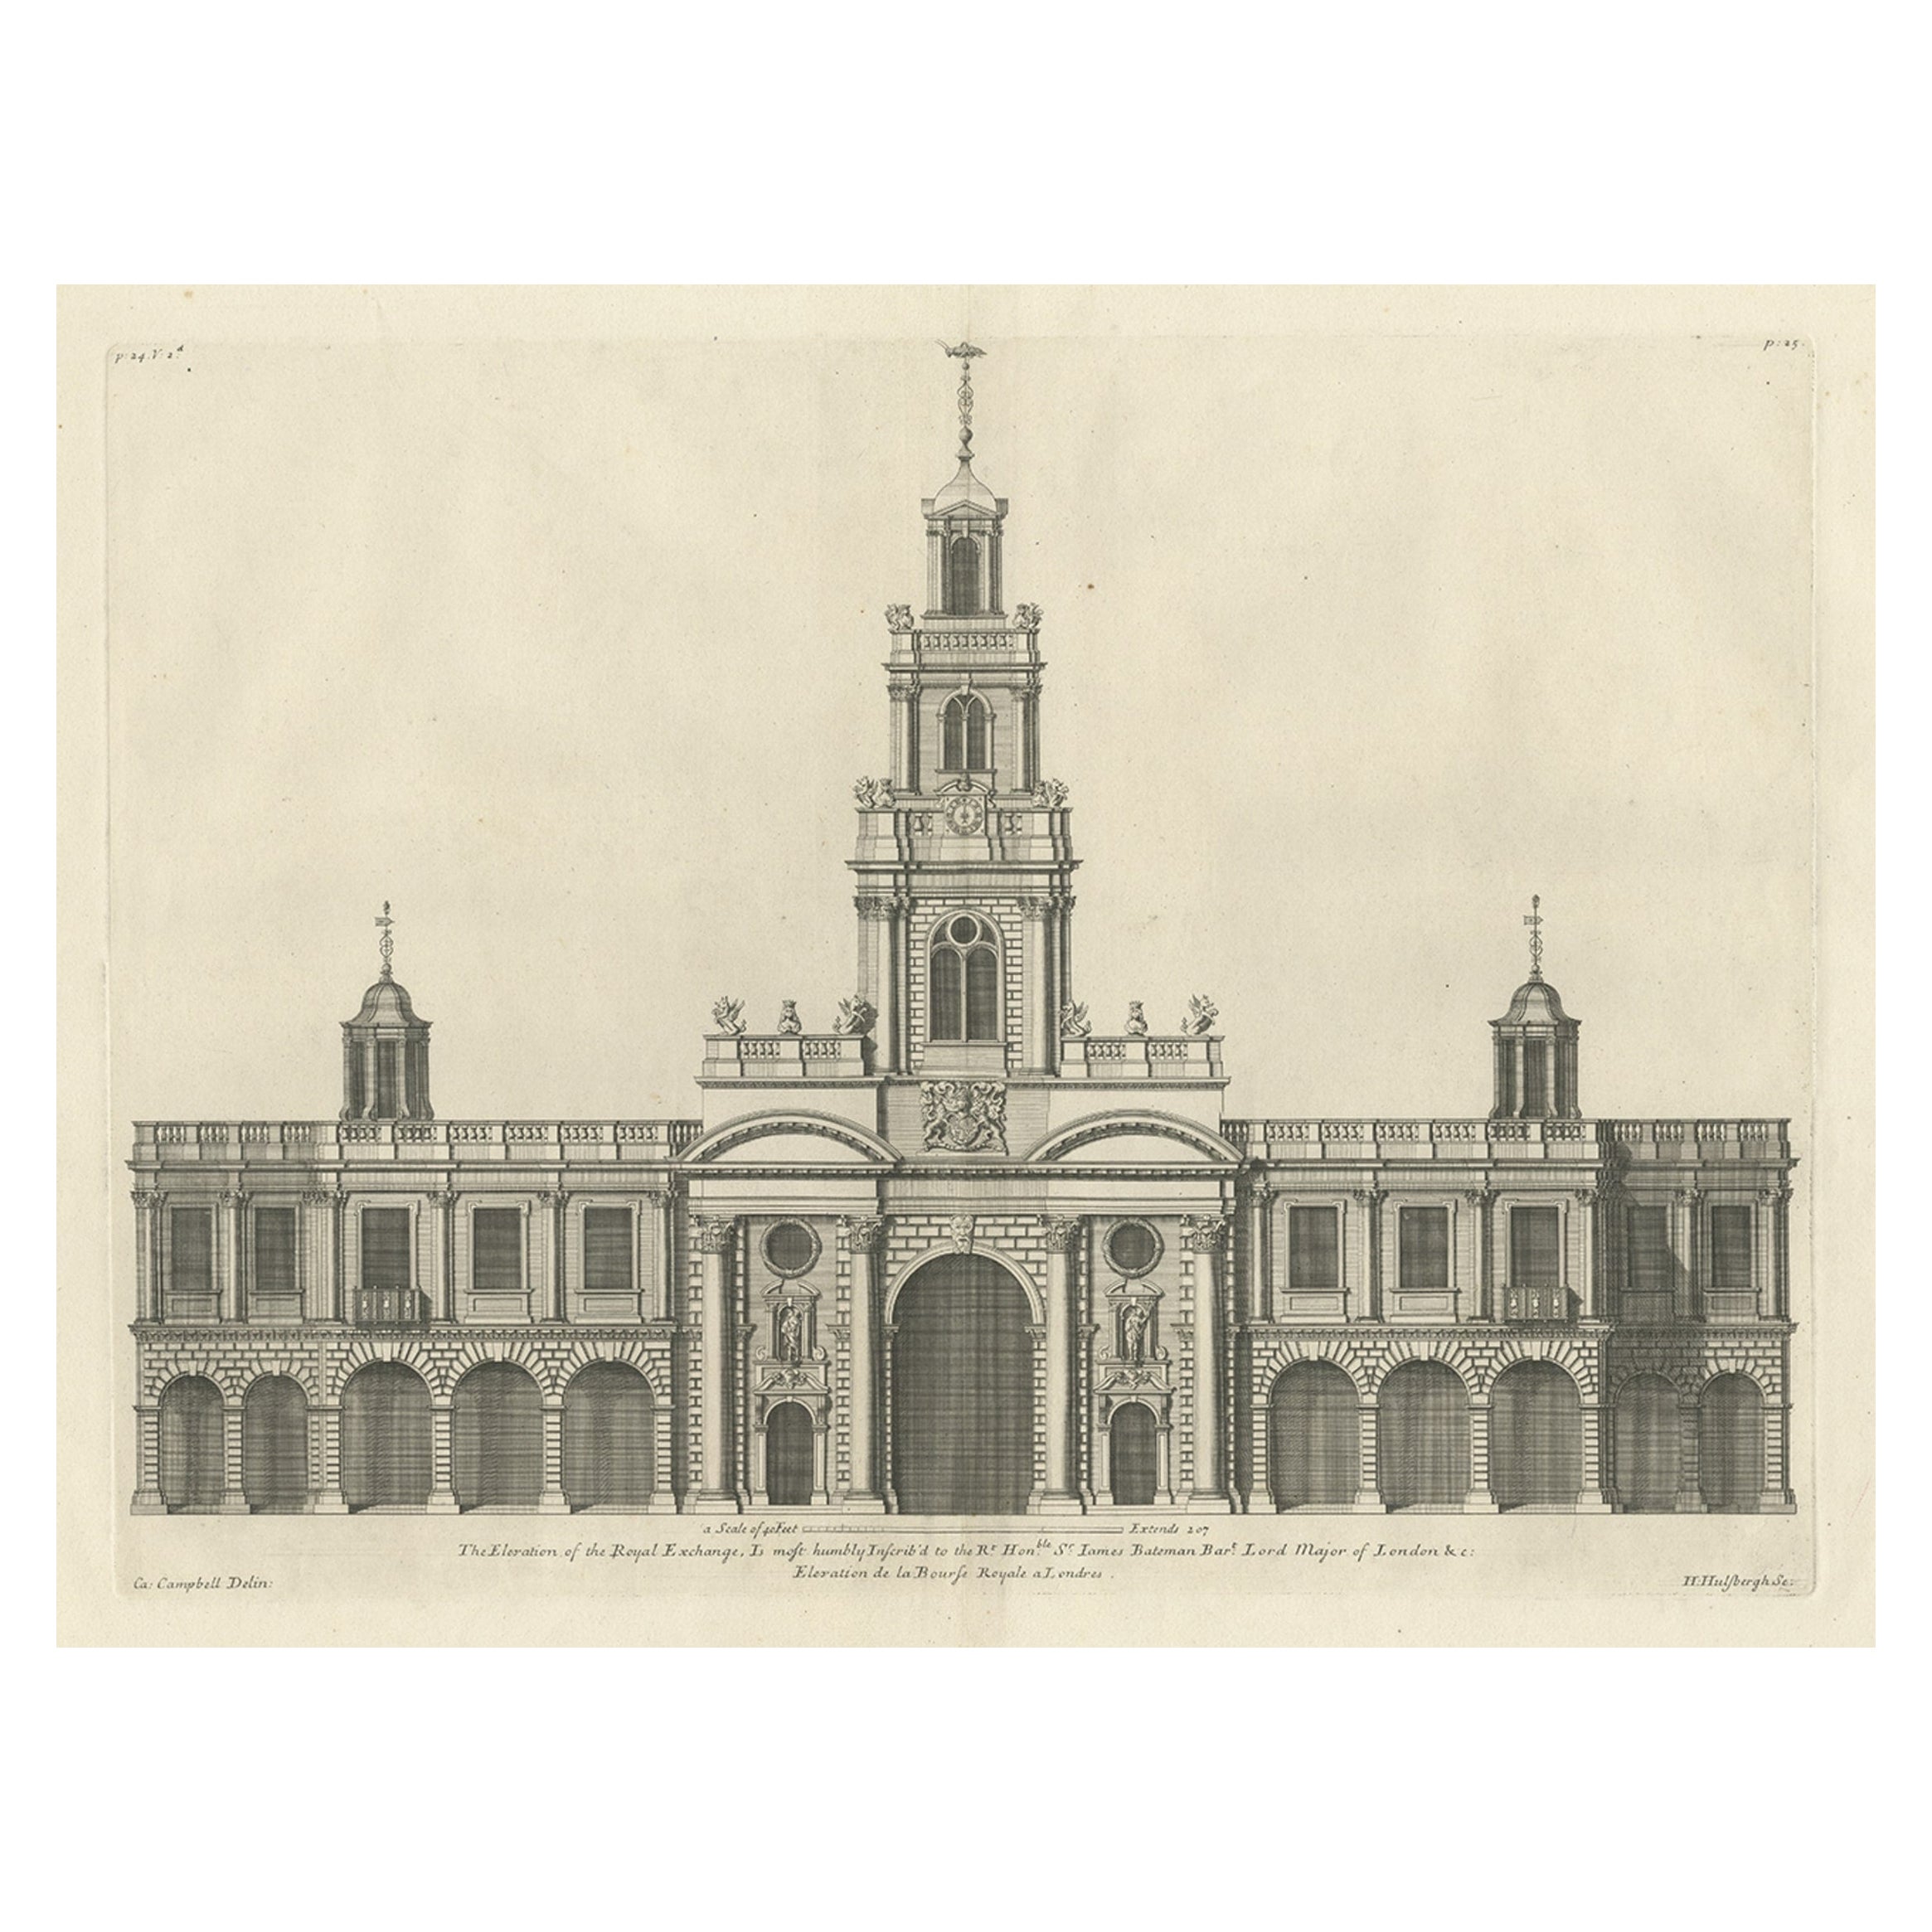 Engraving of the Entrance Facade of the Royal Exchange, Cornhill, London, 1725 For Sale